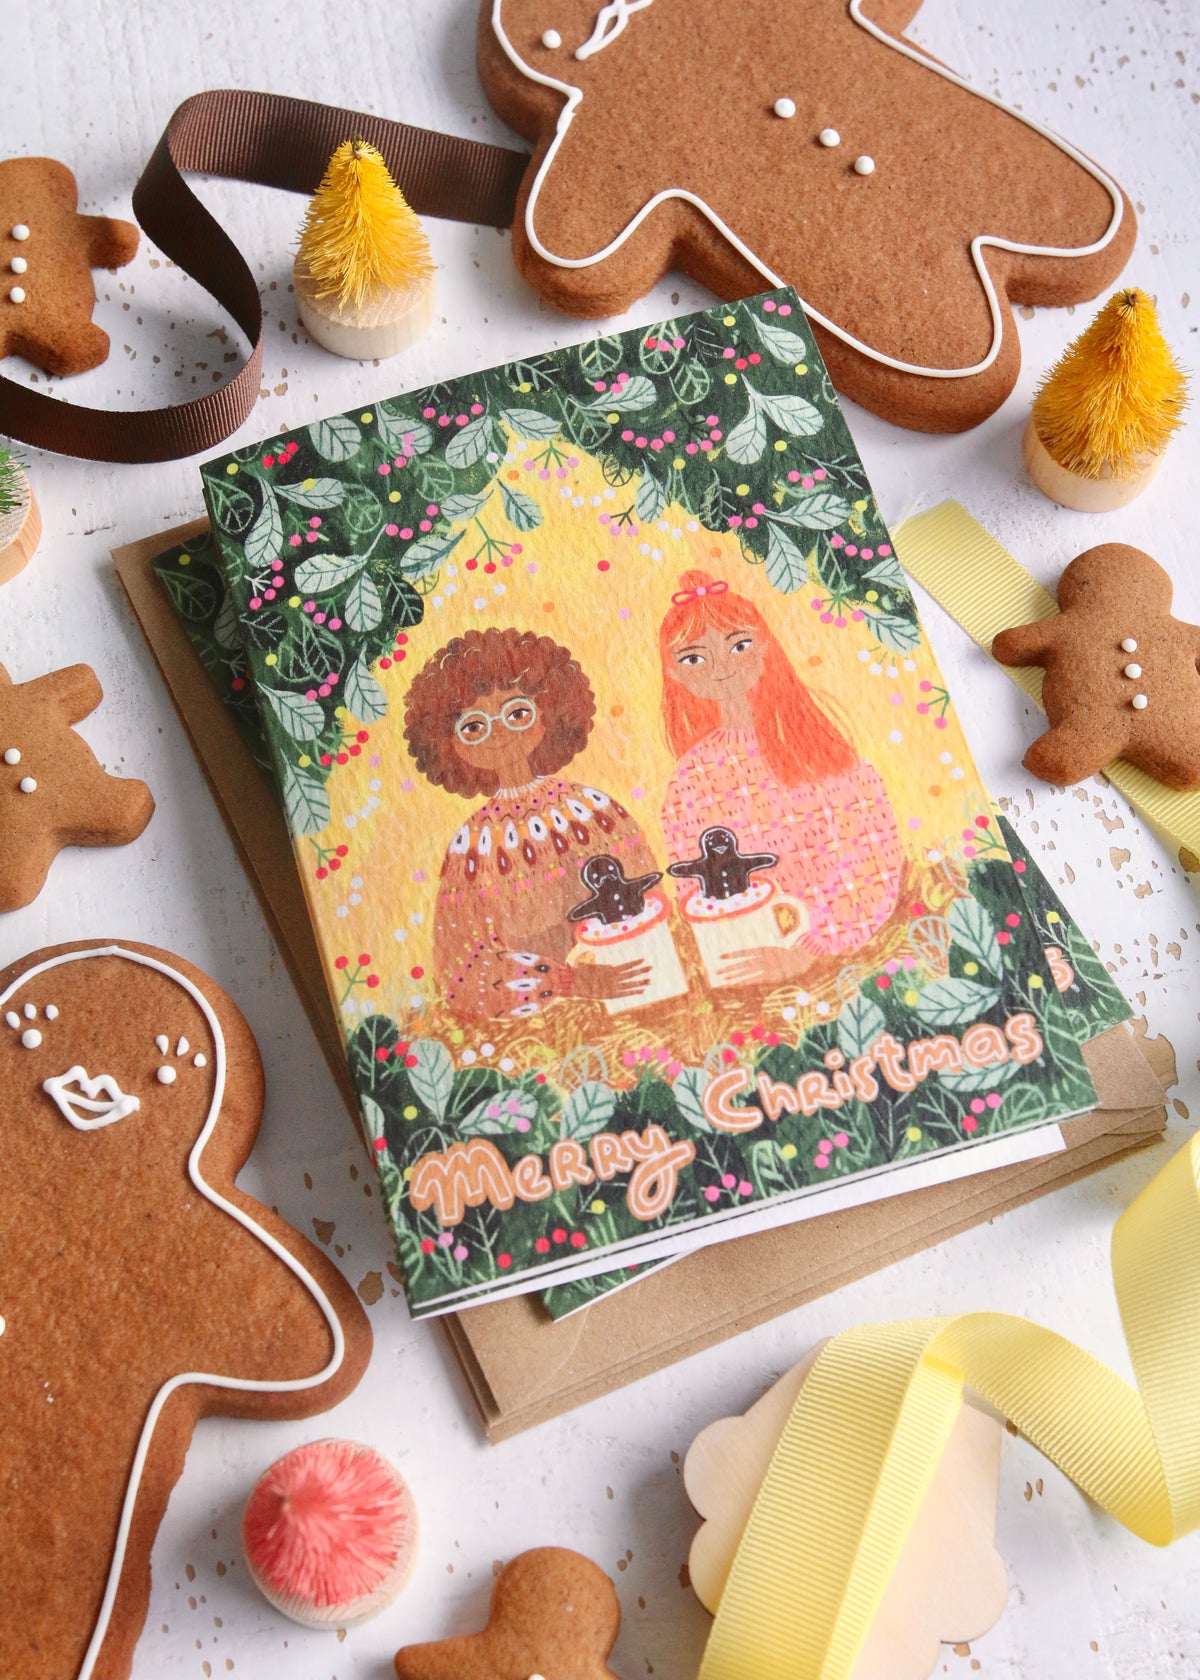 Girls with Gingerbread Mugs Card